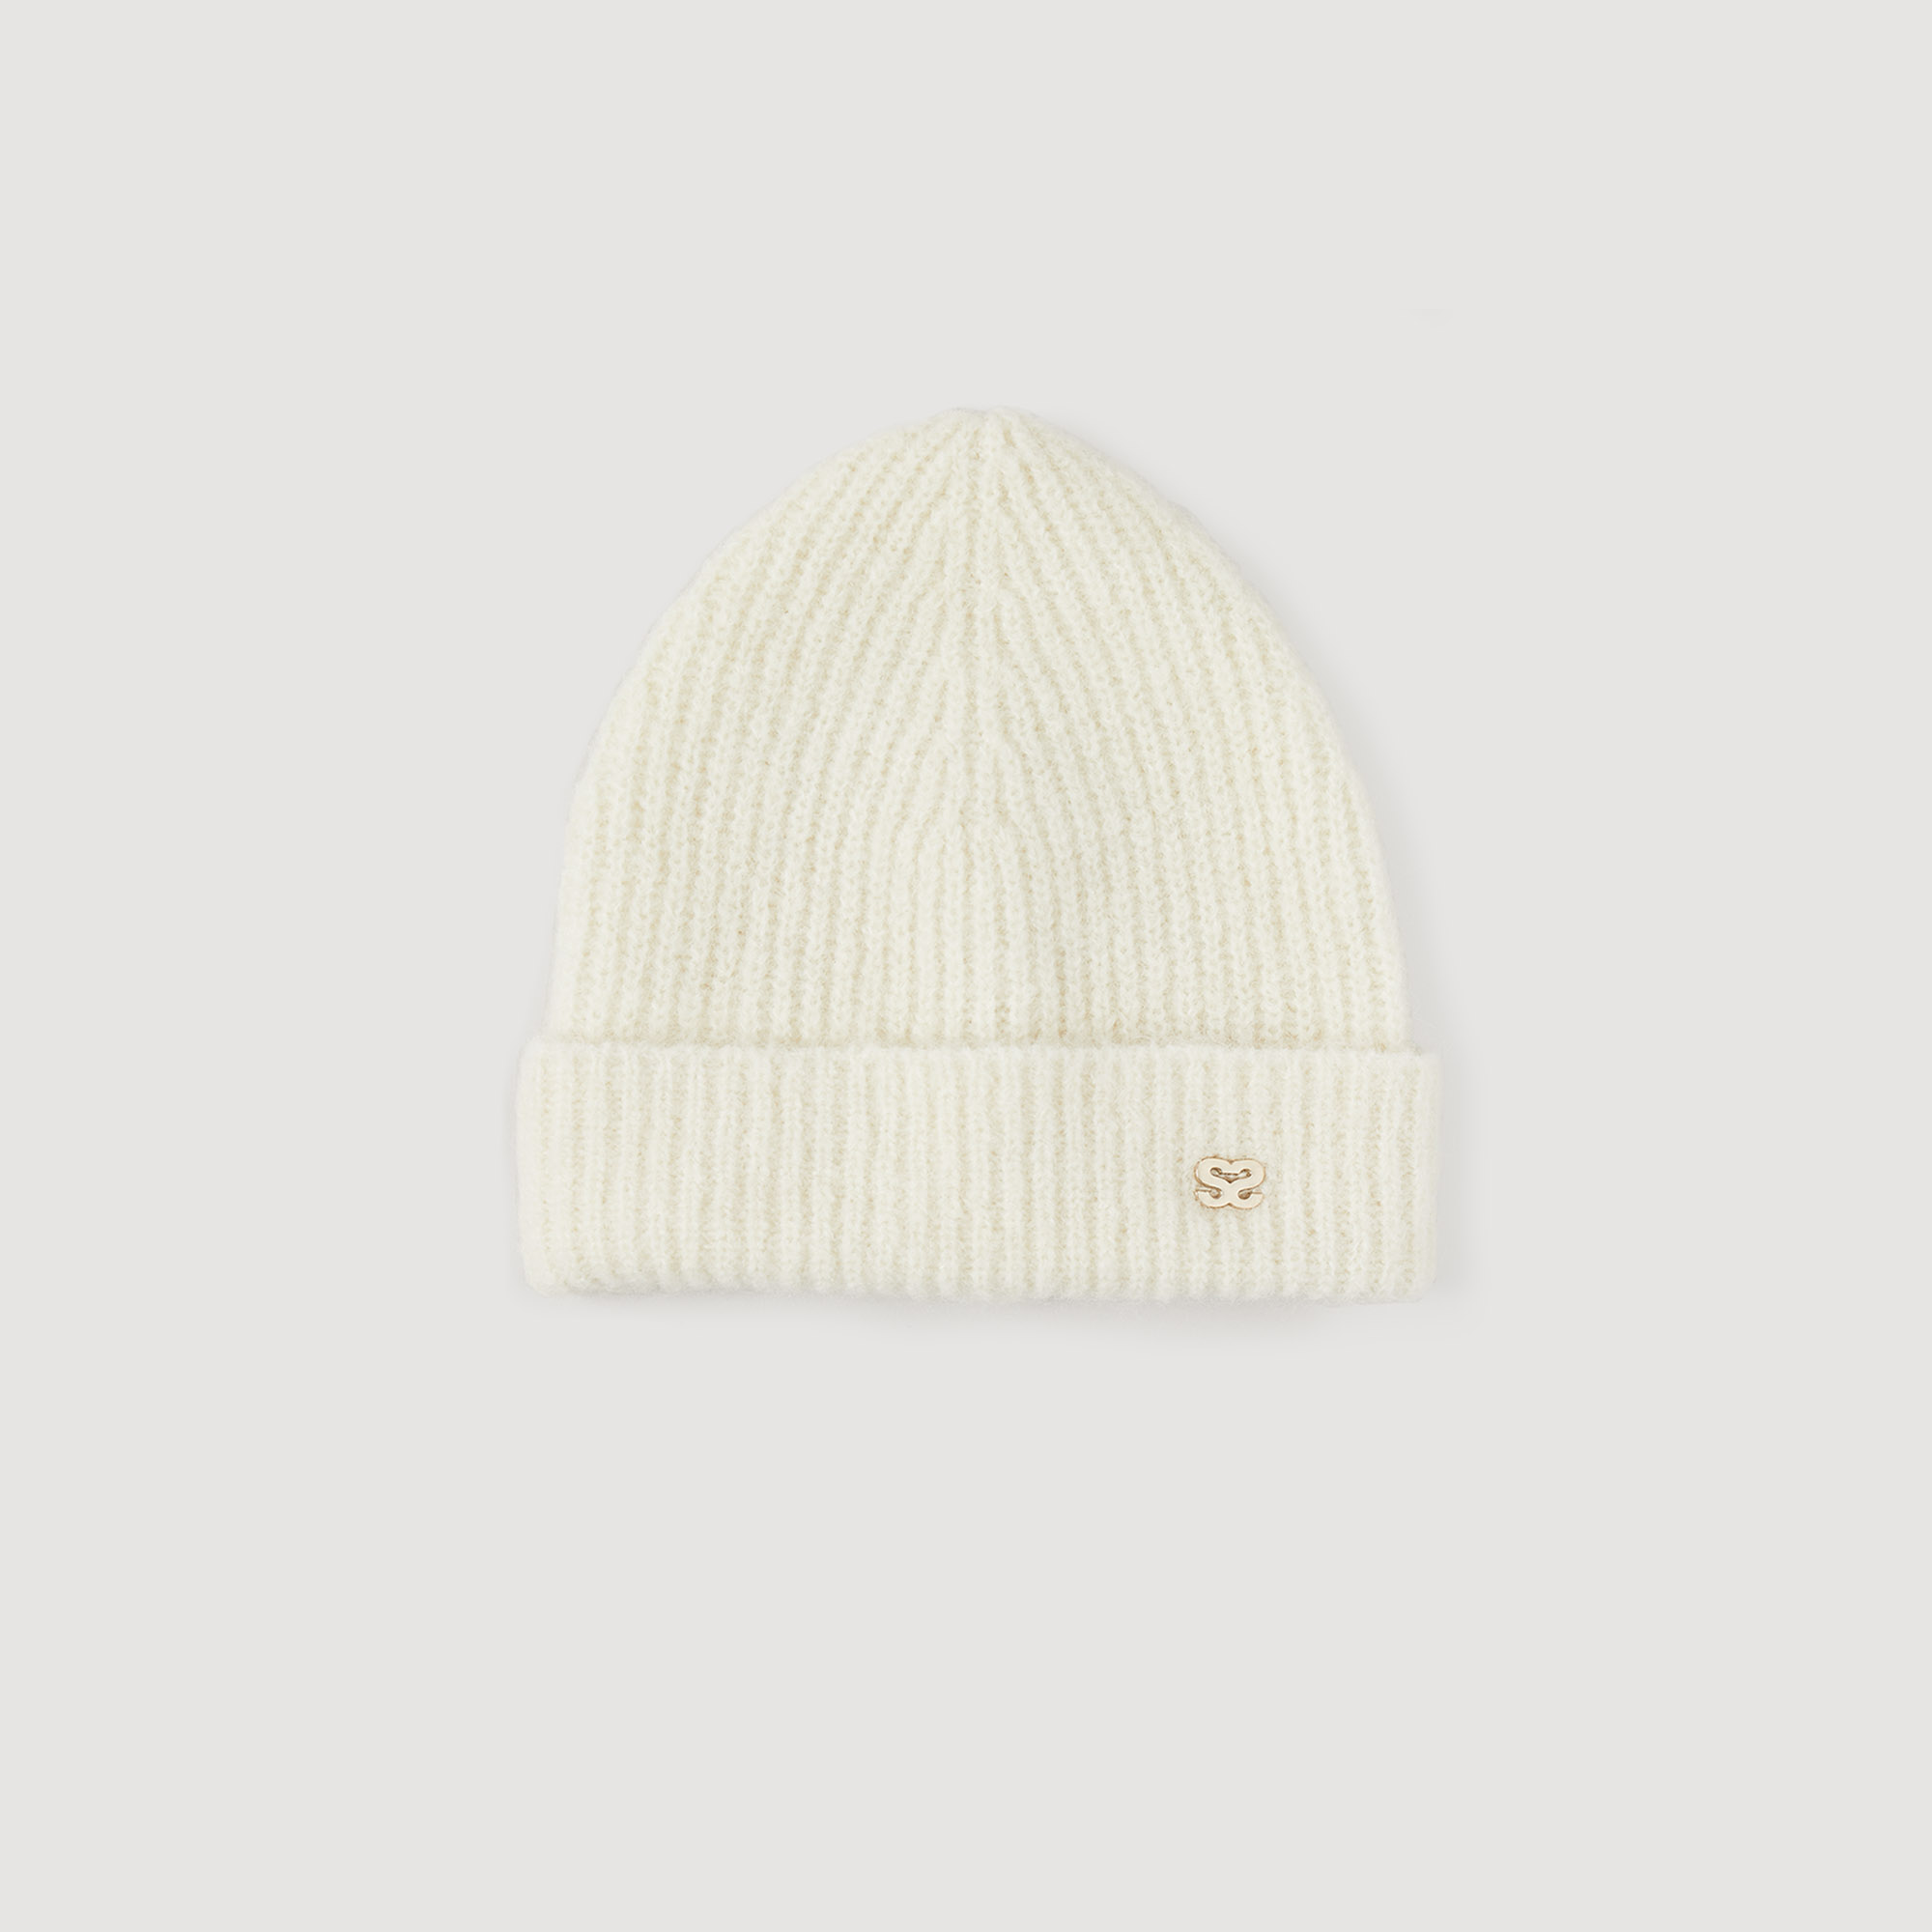 Sandro polyamide Rib knit hat embellished with an S on the turn-up